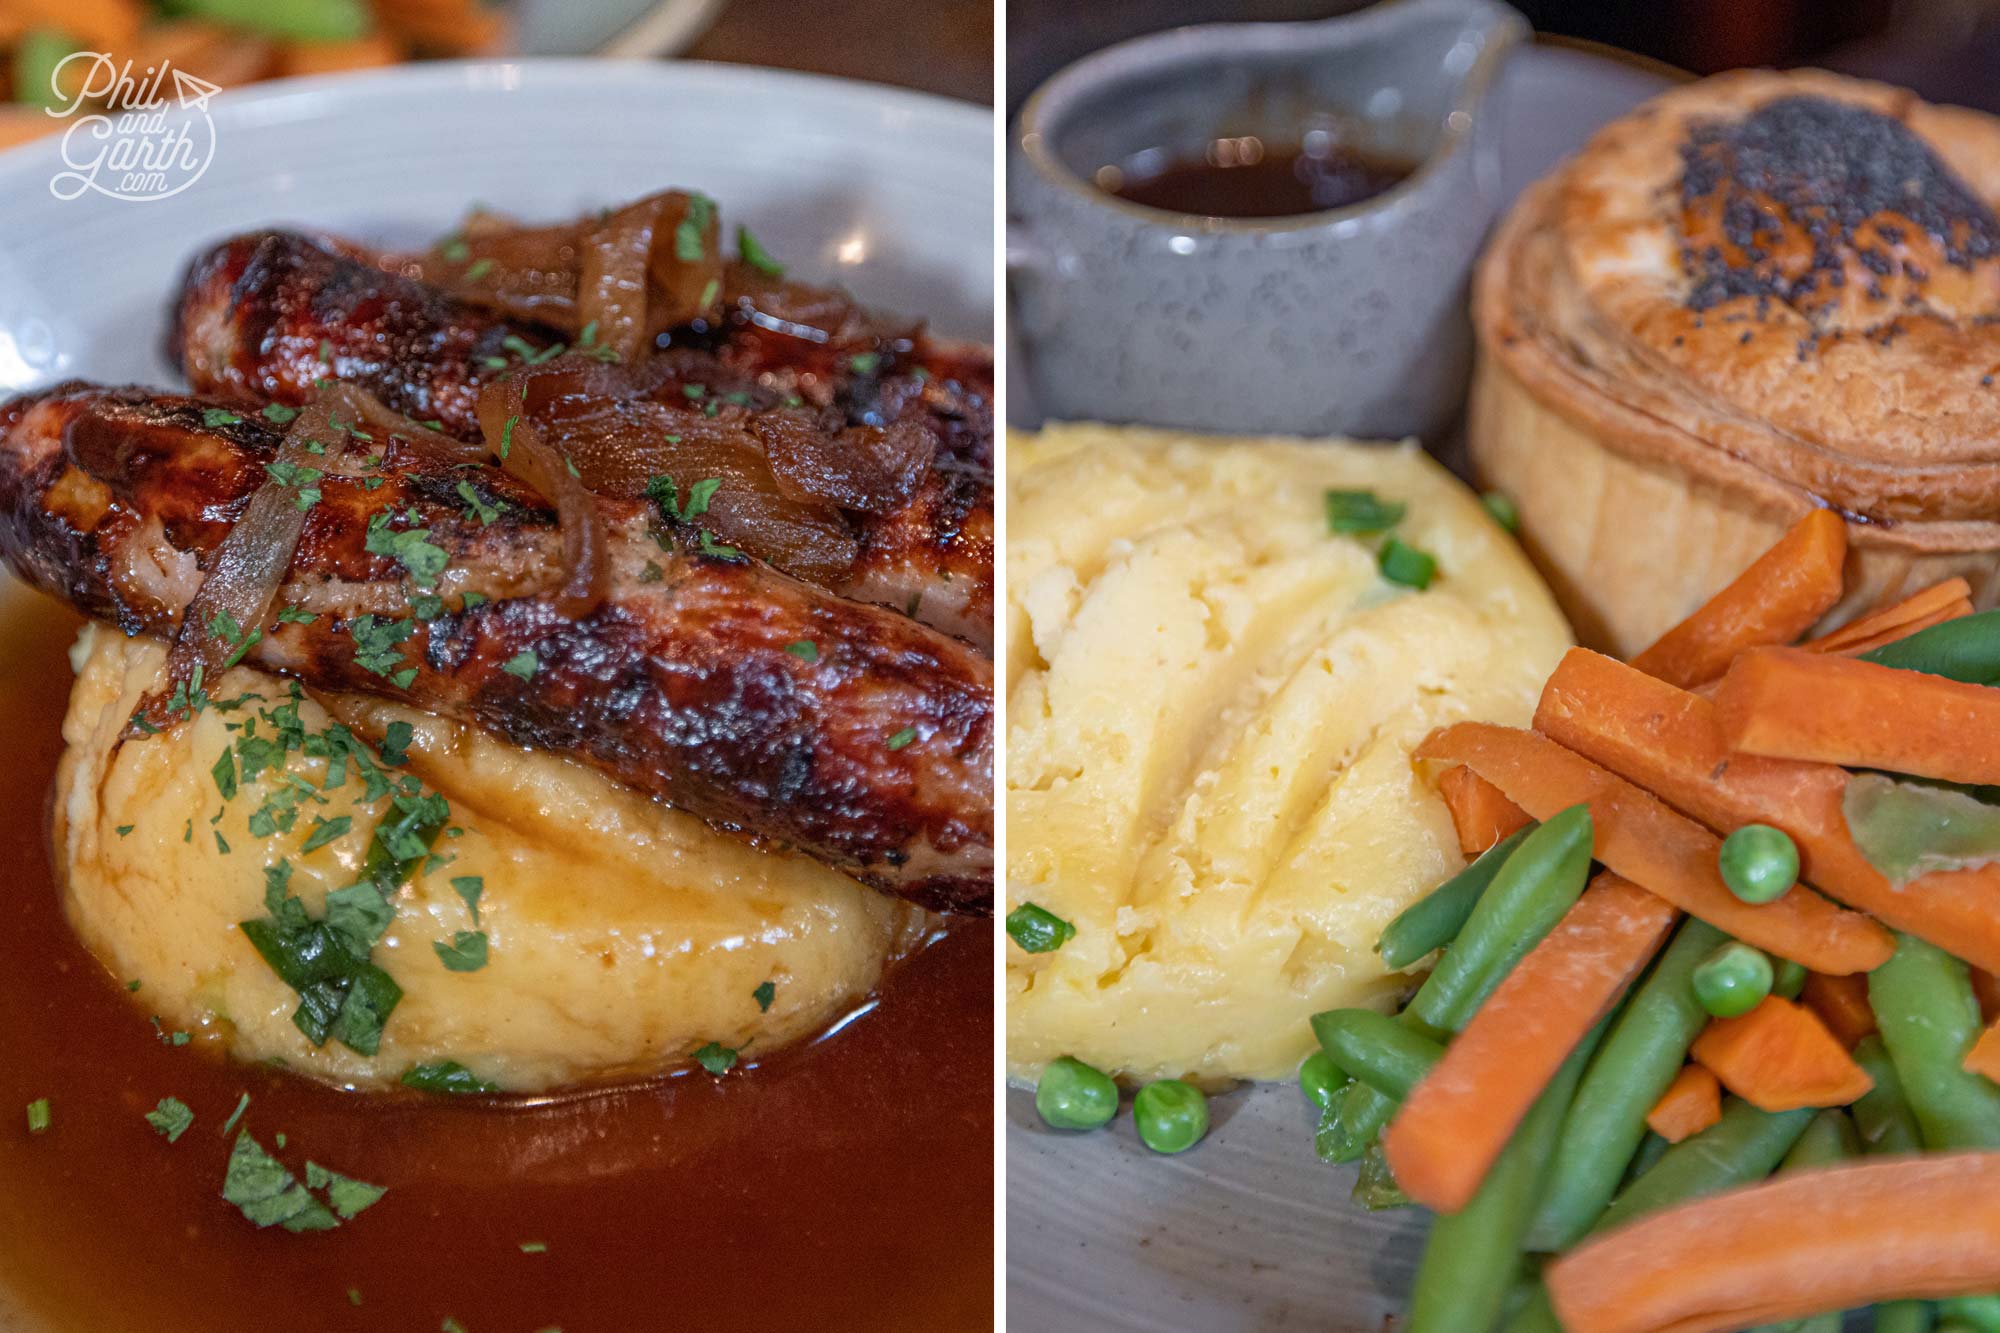 The Crown serves traditional pub food